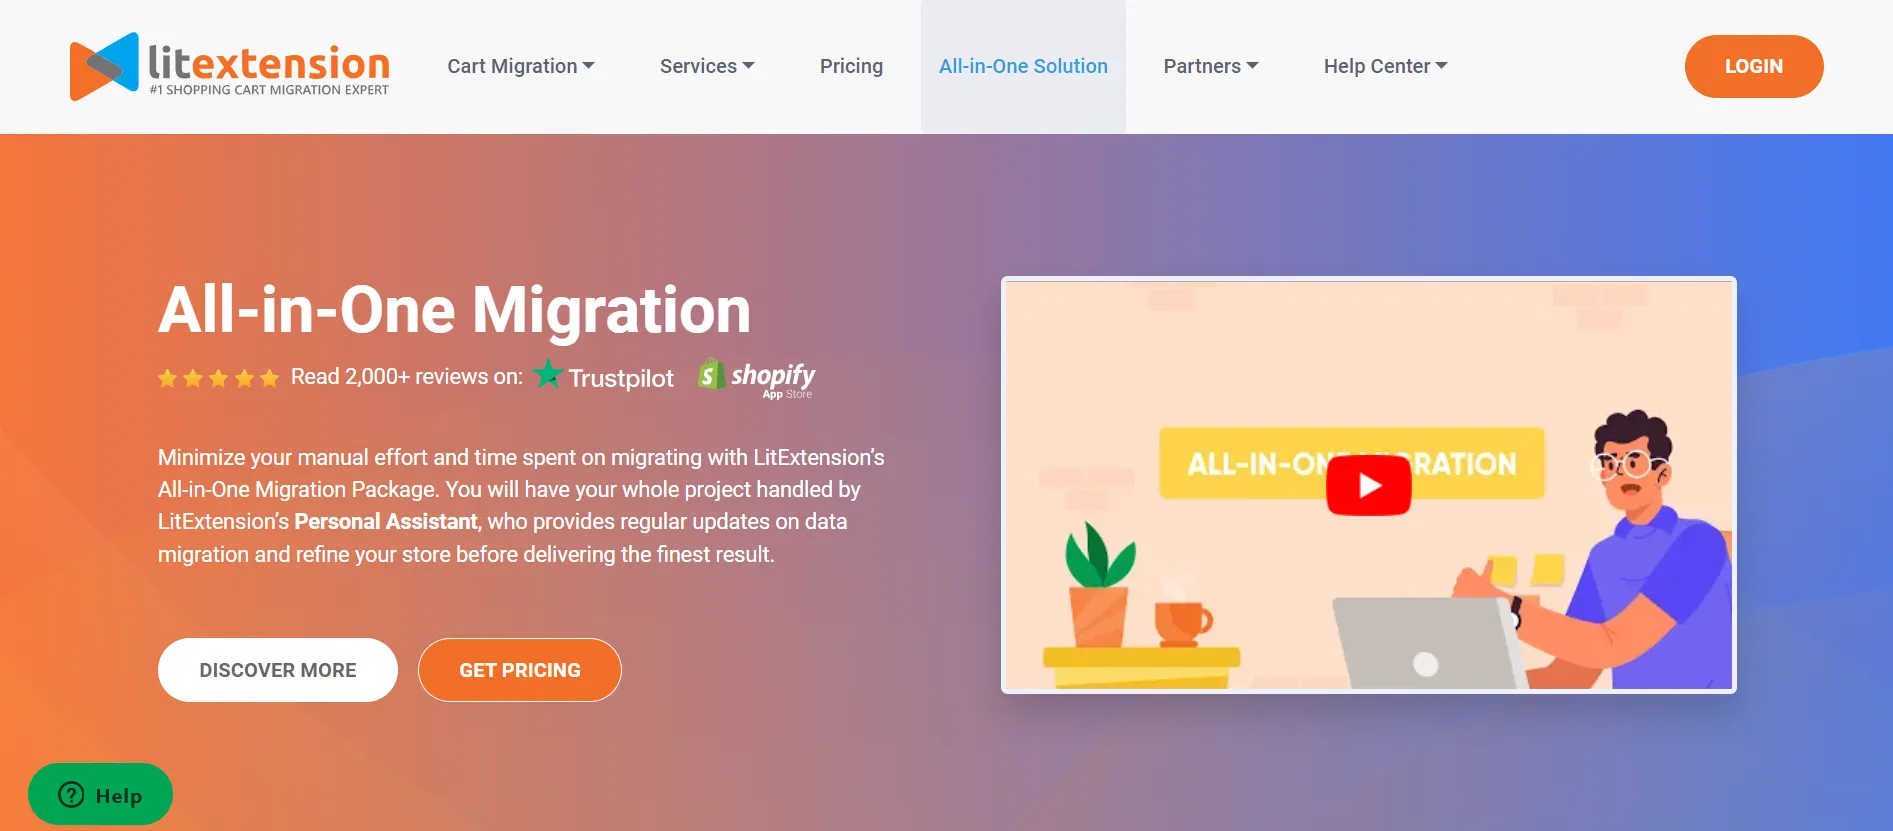 LitExtension All-in-One Migration Package